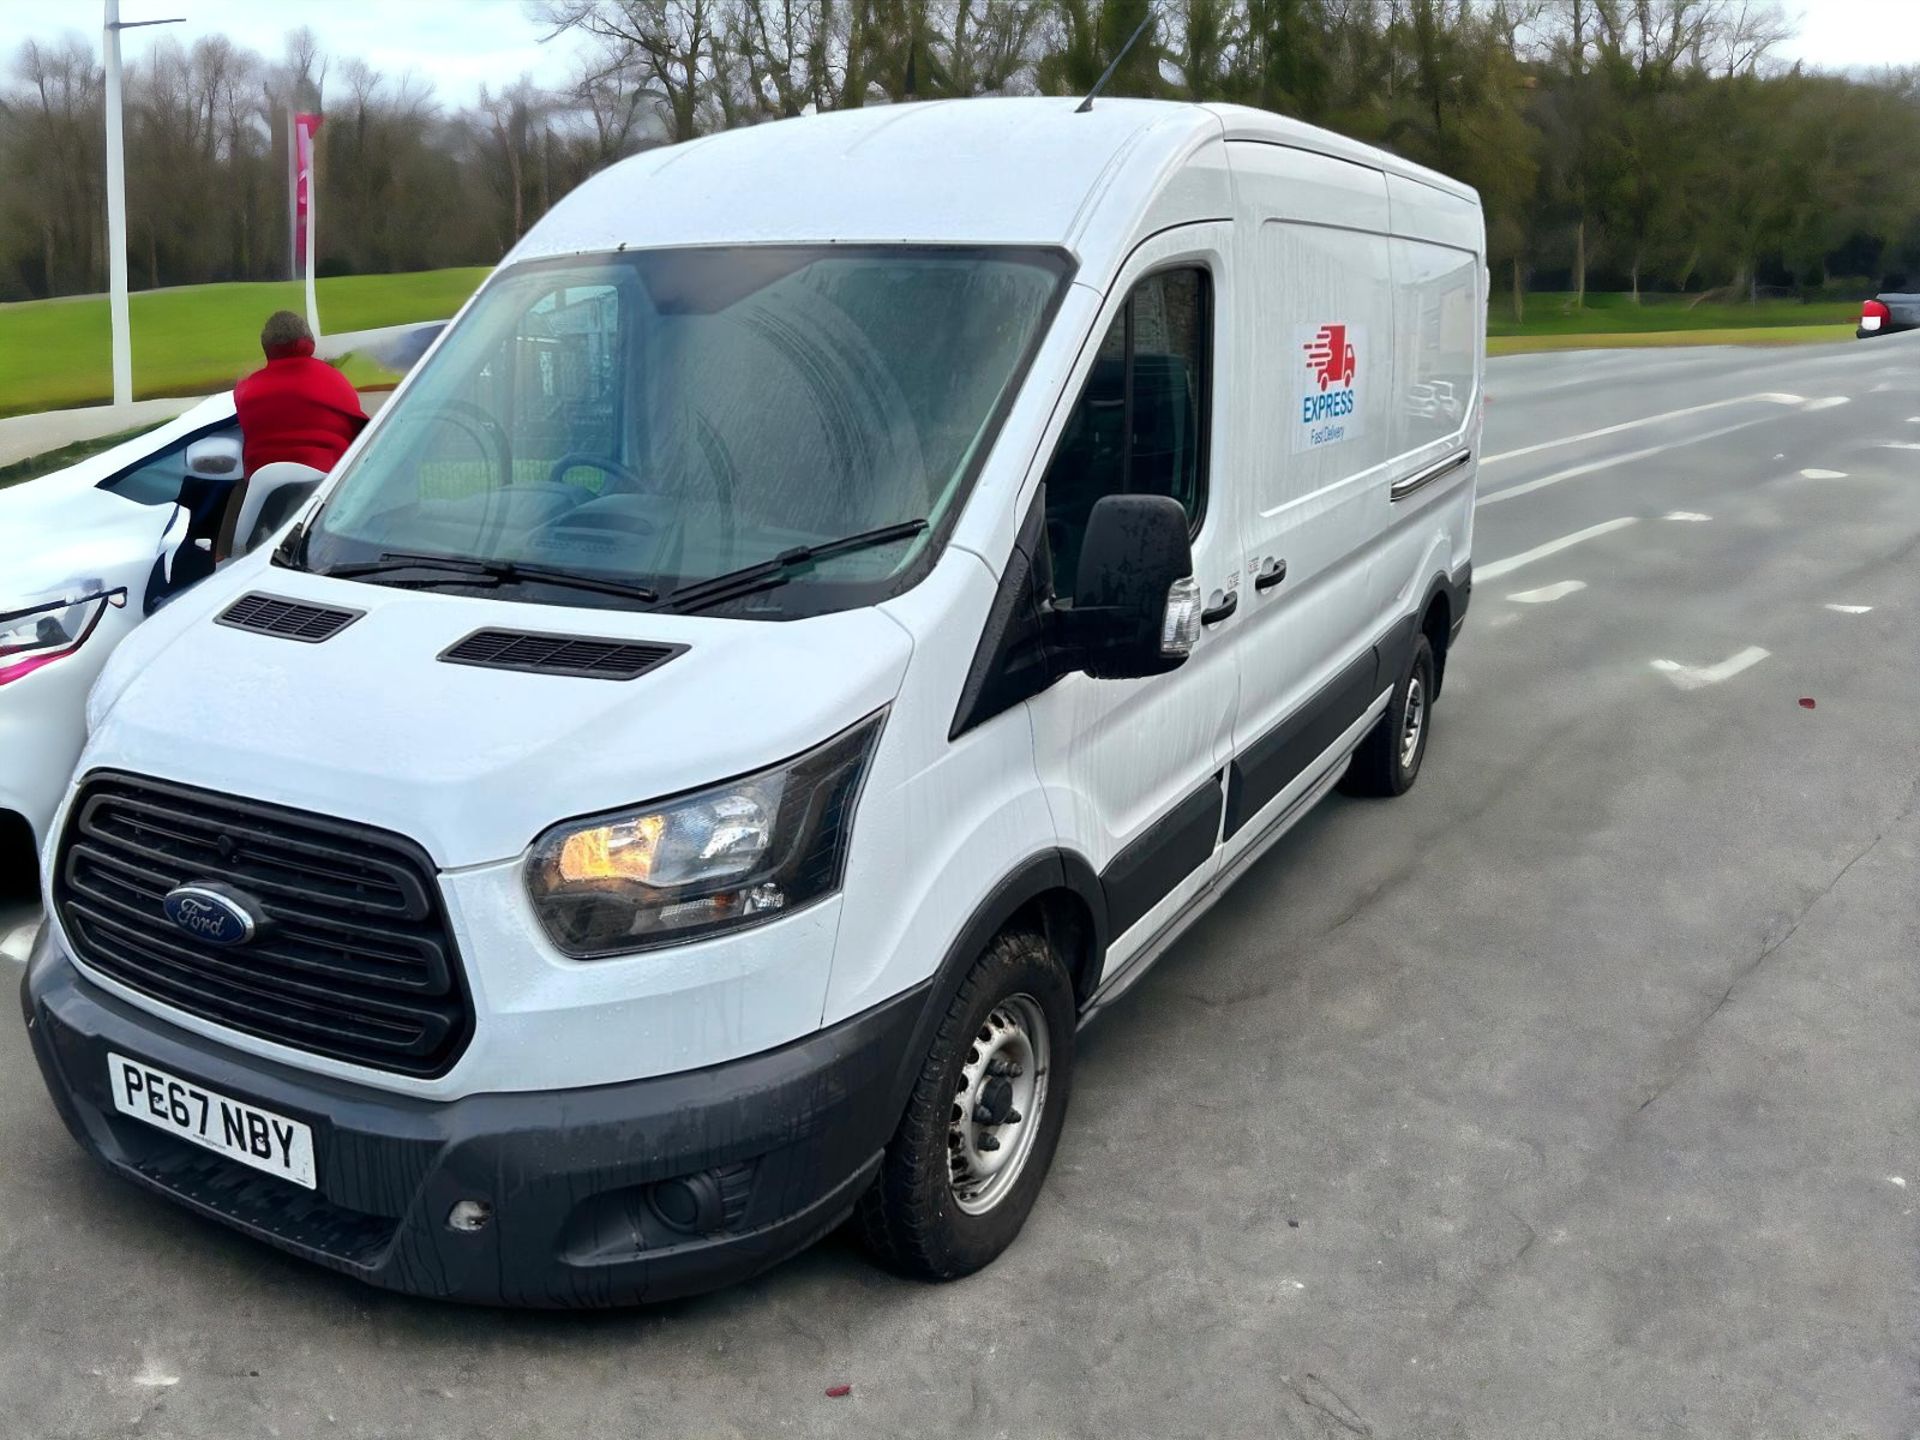 2017-67 REG FORD TRANSIT T350 RWD L3H2 HPI CLEAR - READY TO GO! - Image 5 of 11